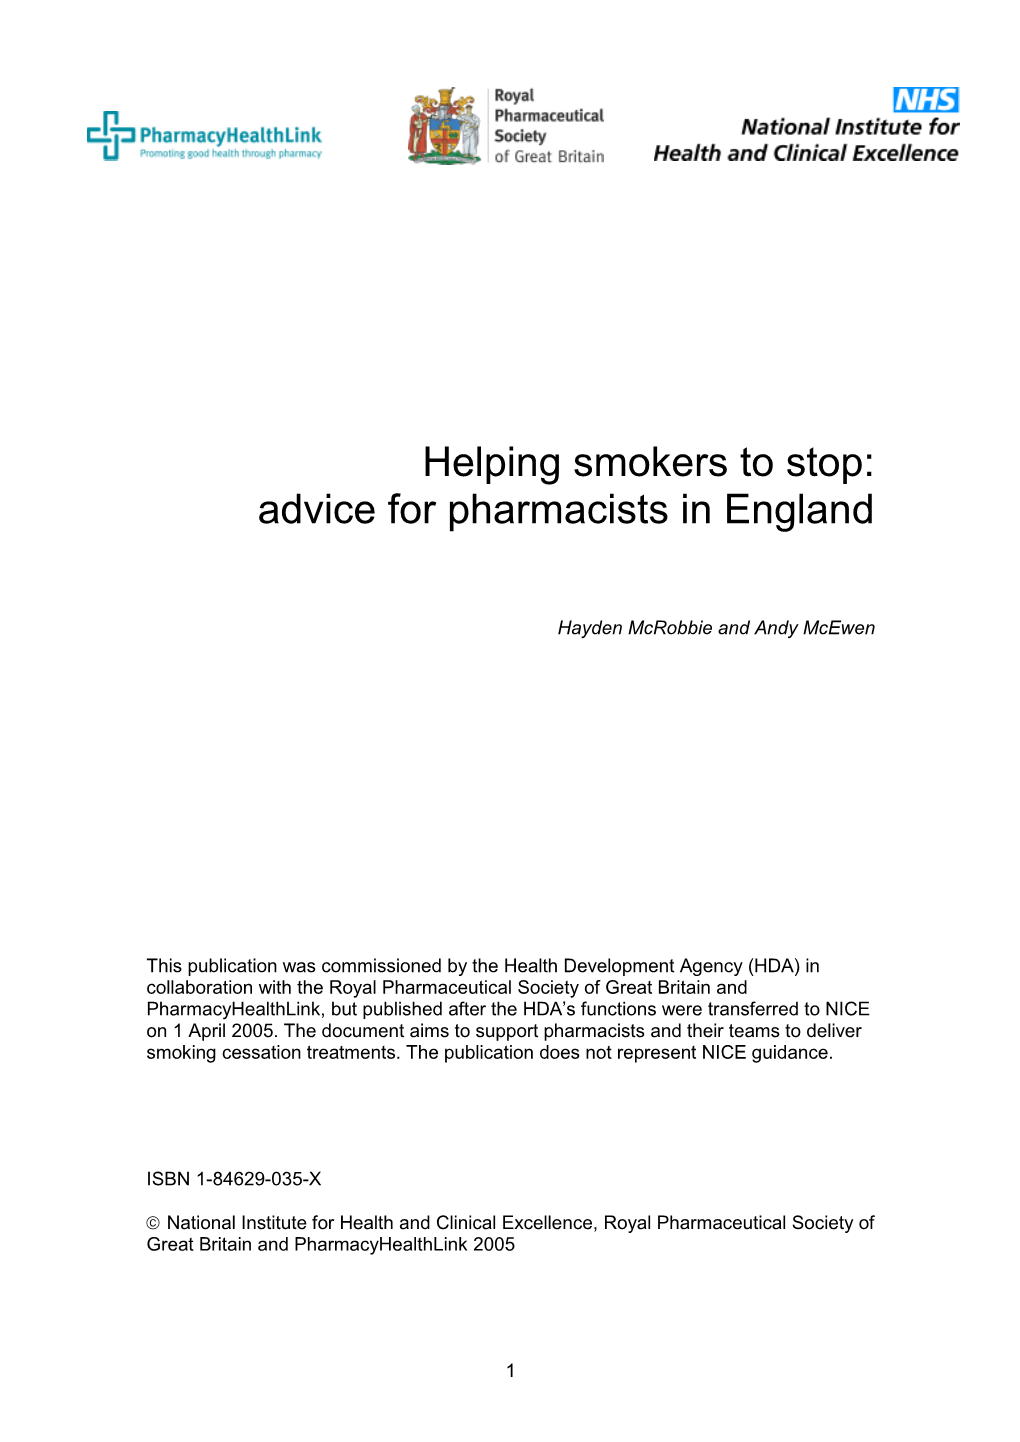 Helping Smokers to Stop: Advice for Pharmacists in England